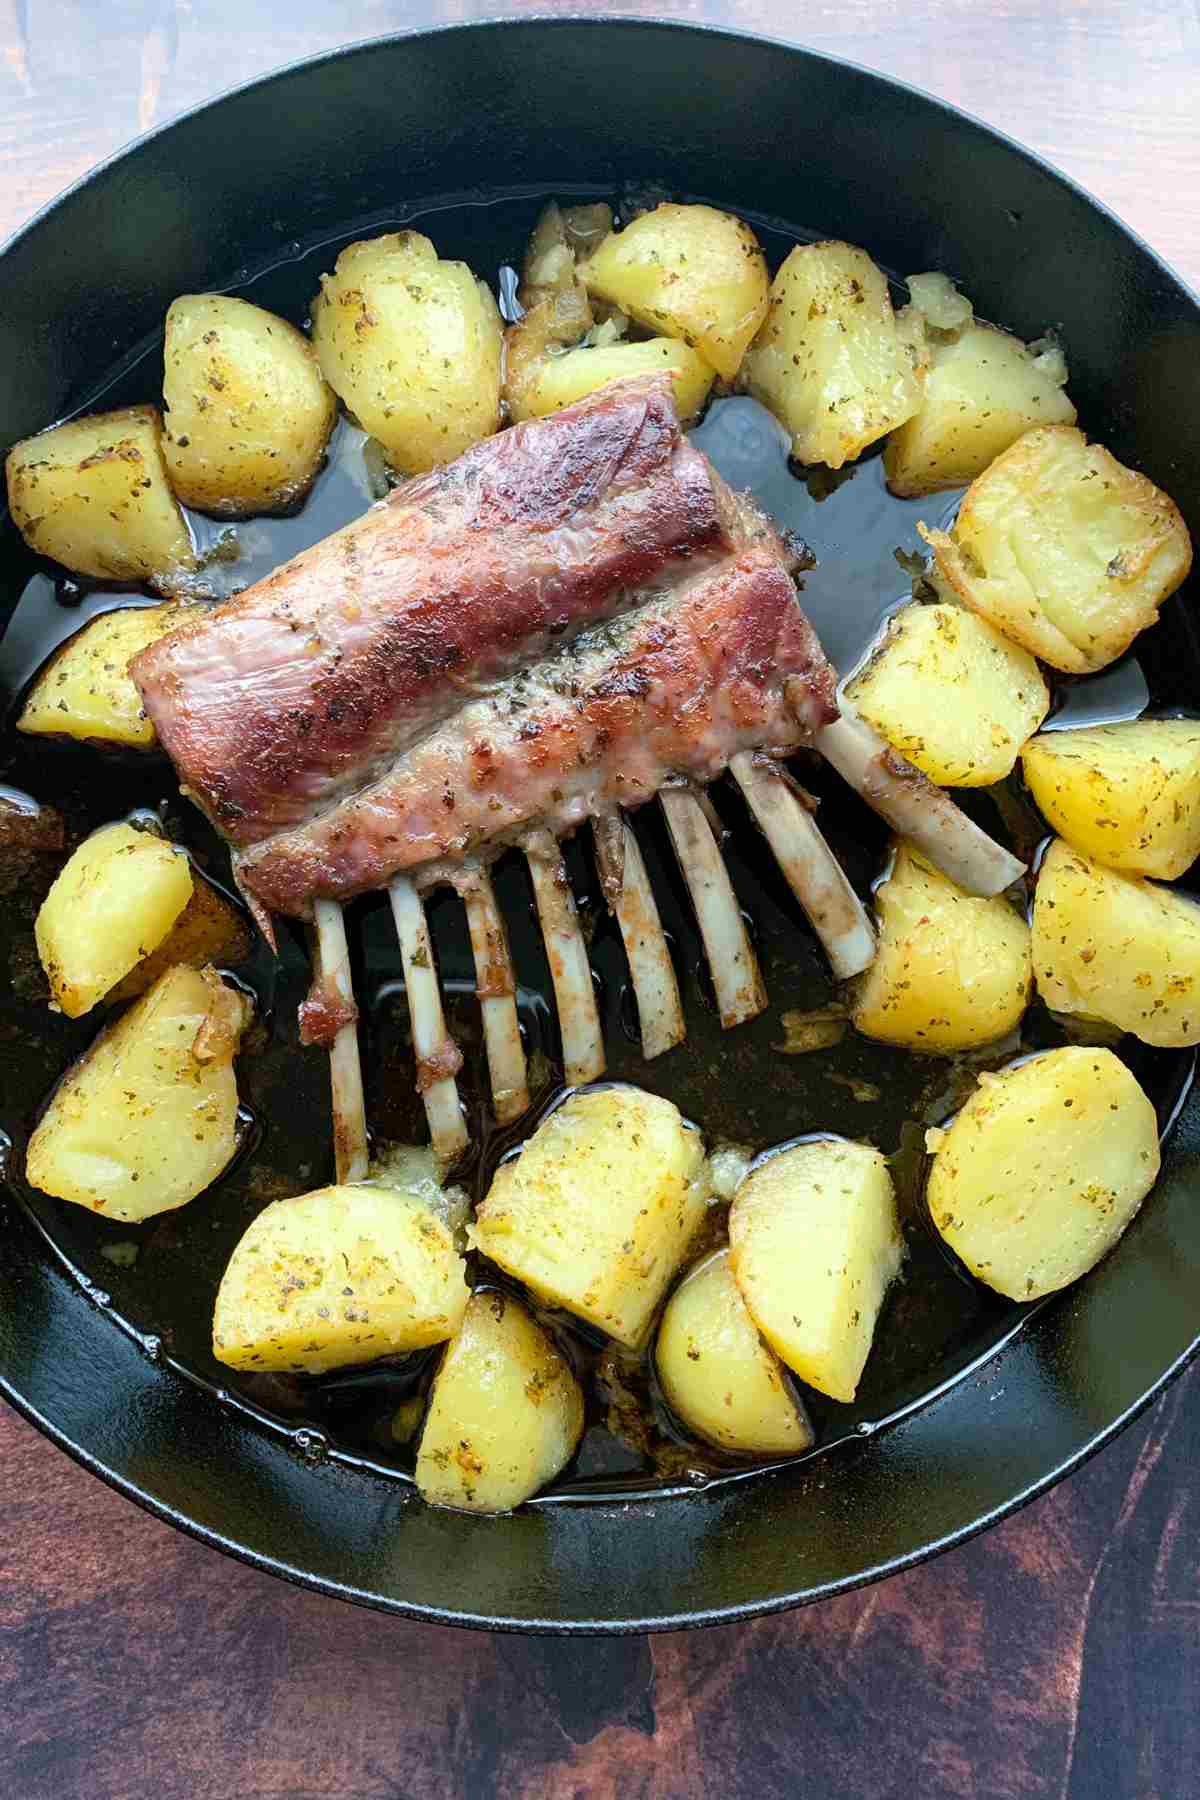 Baked lamb ribs with potato in cast iron skillet overhed.